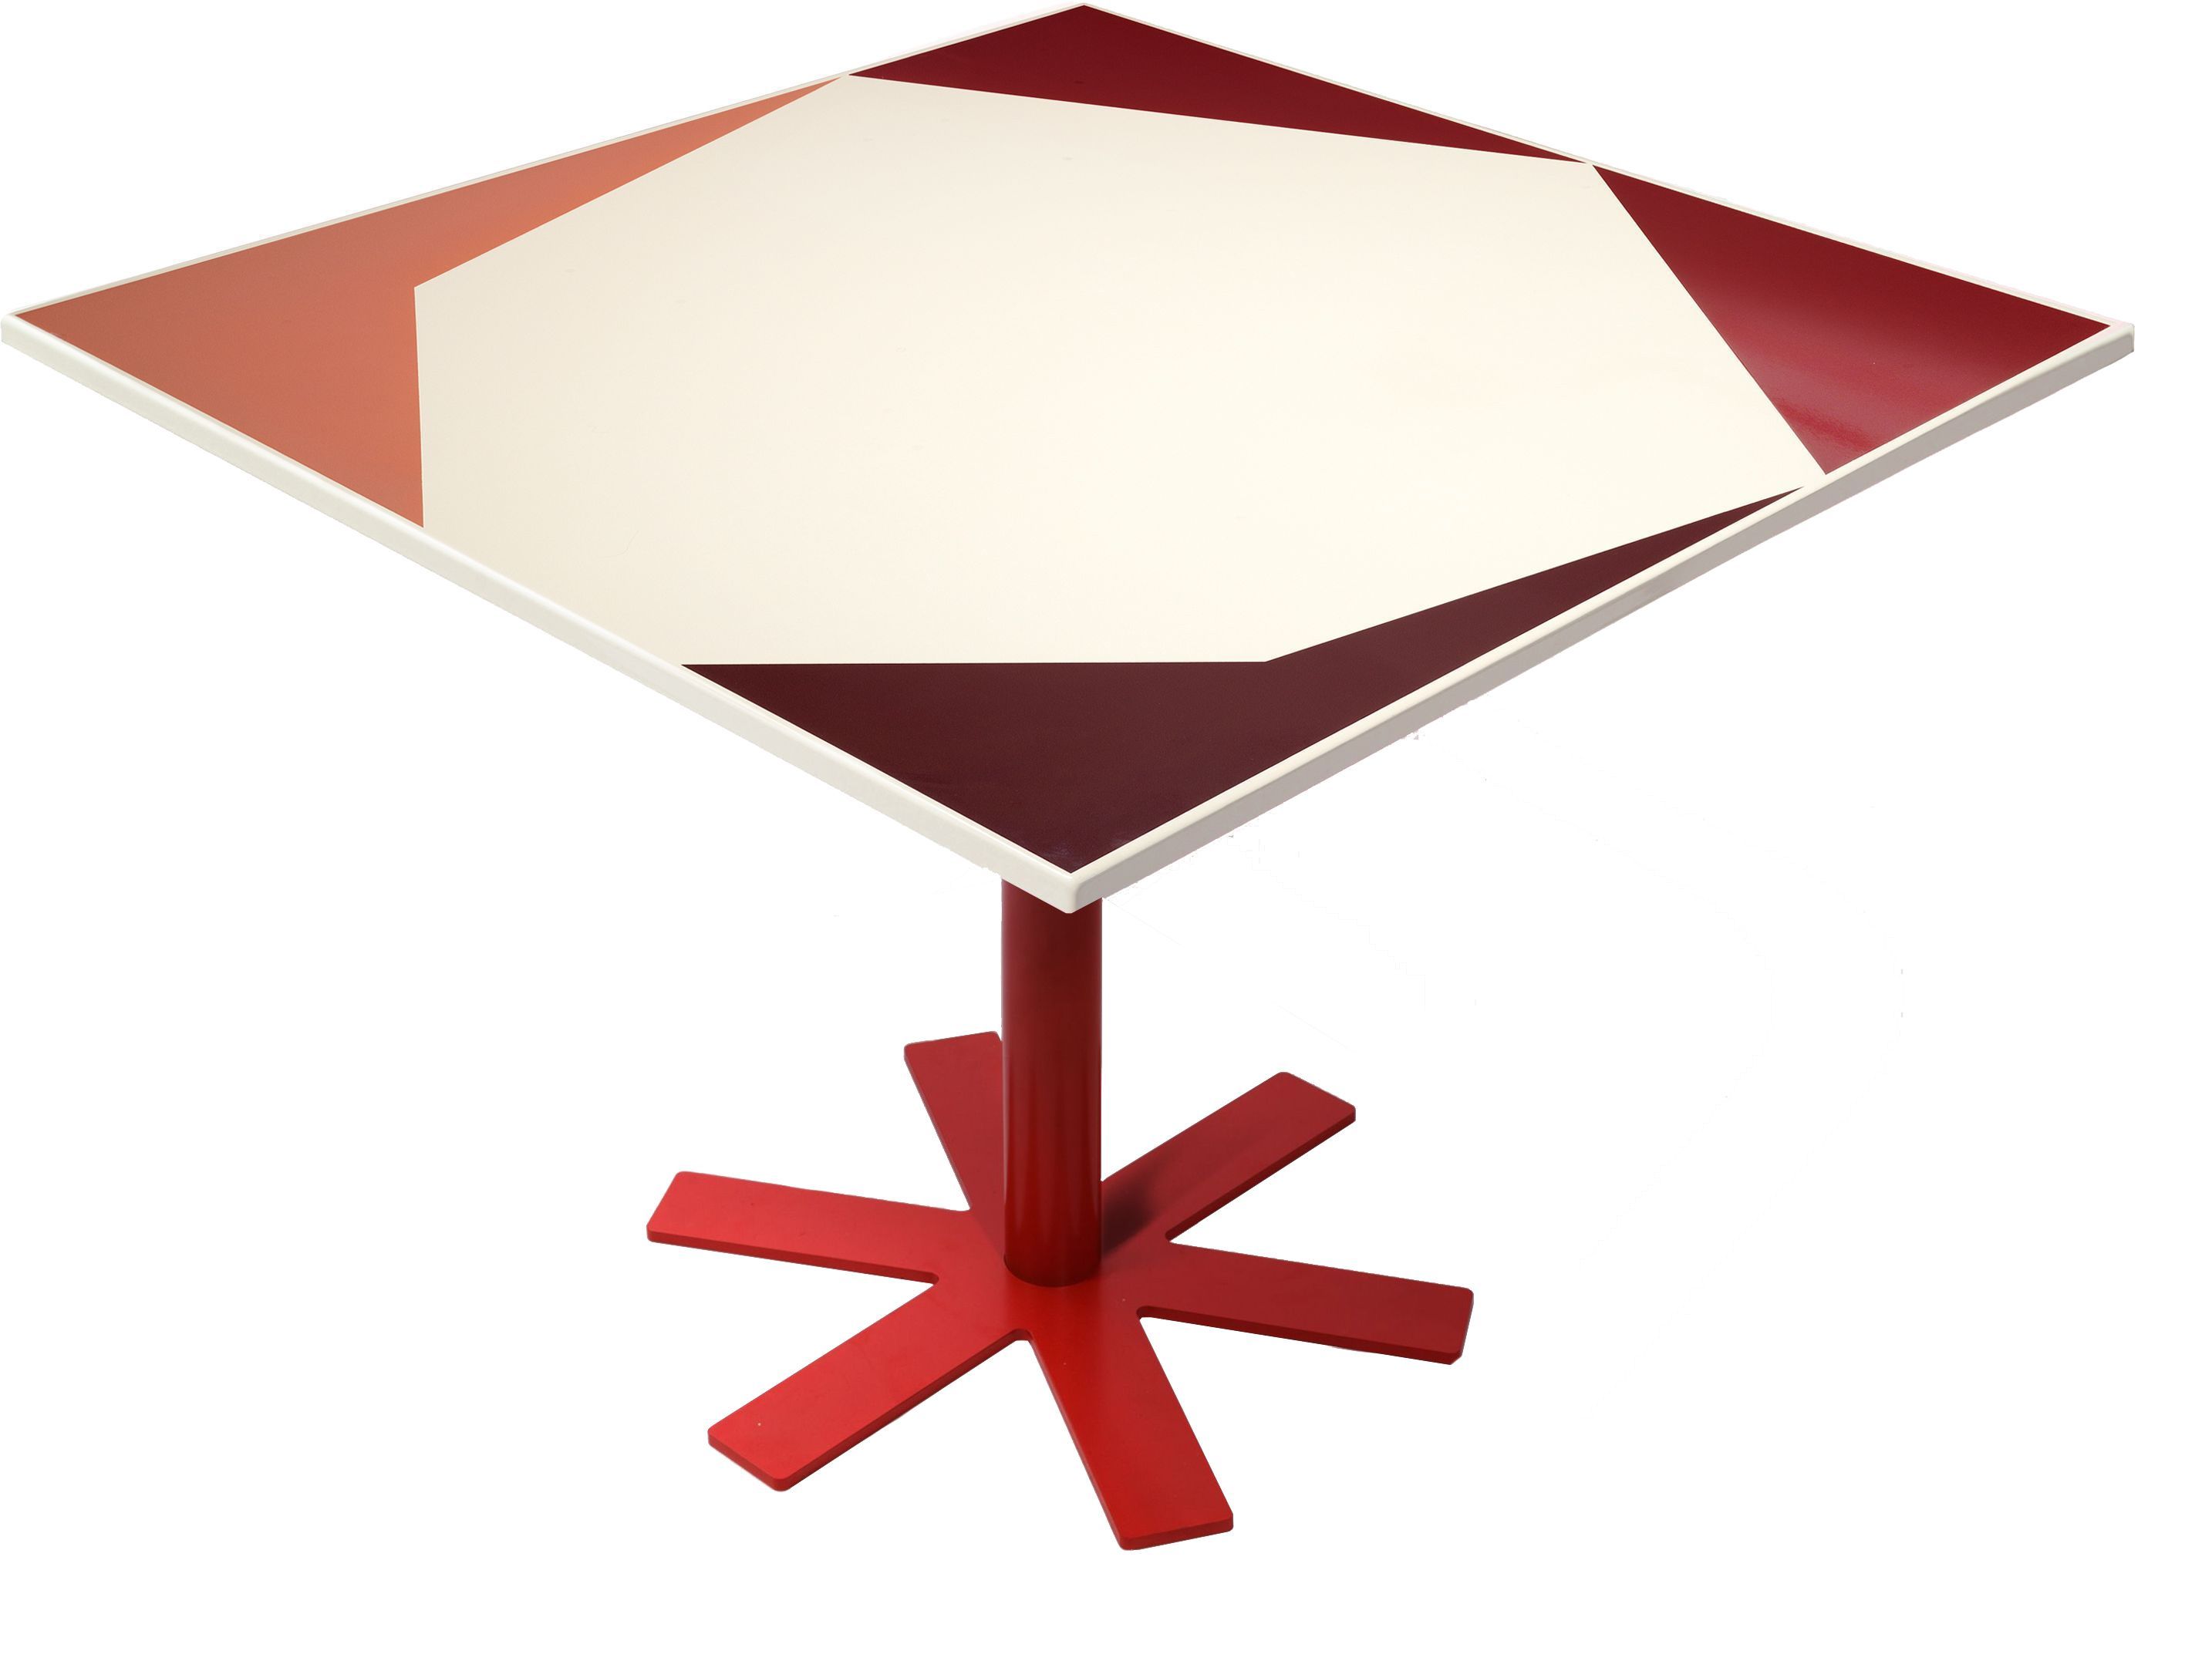 Parrot table by Petite Friture